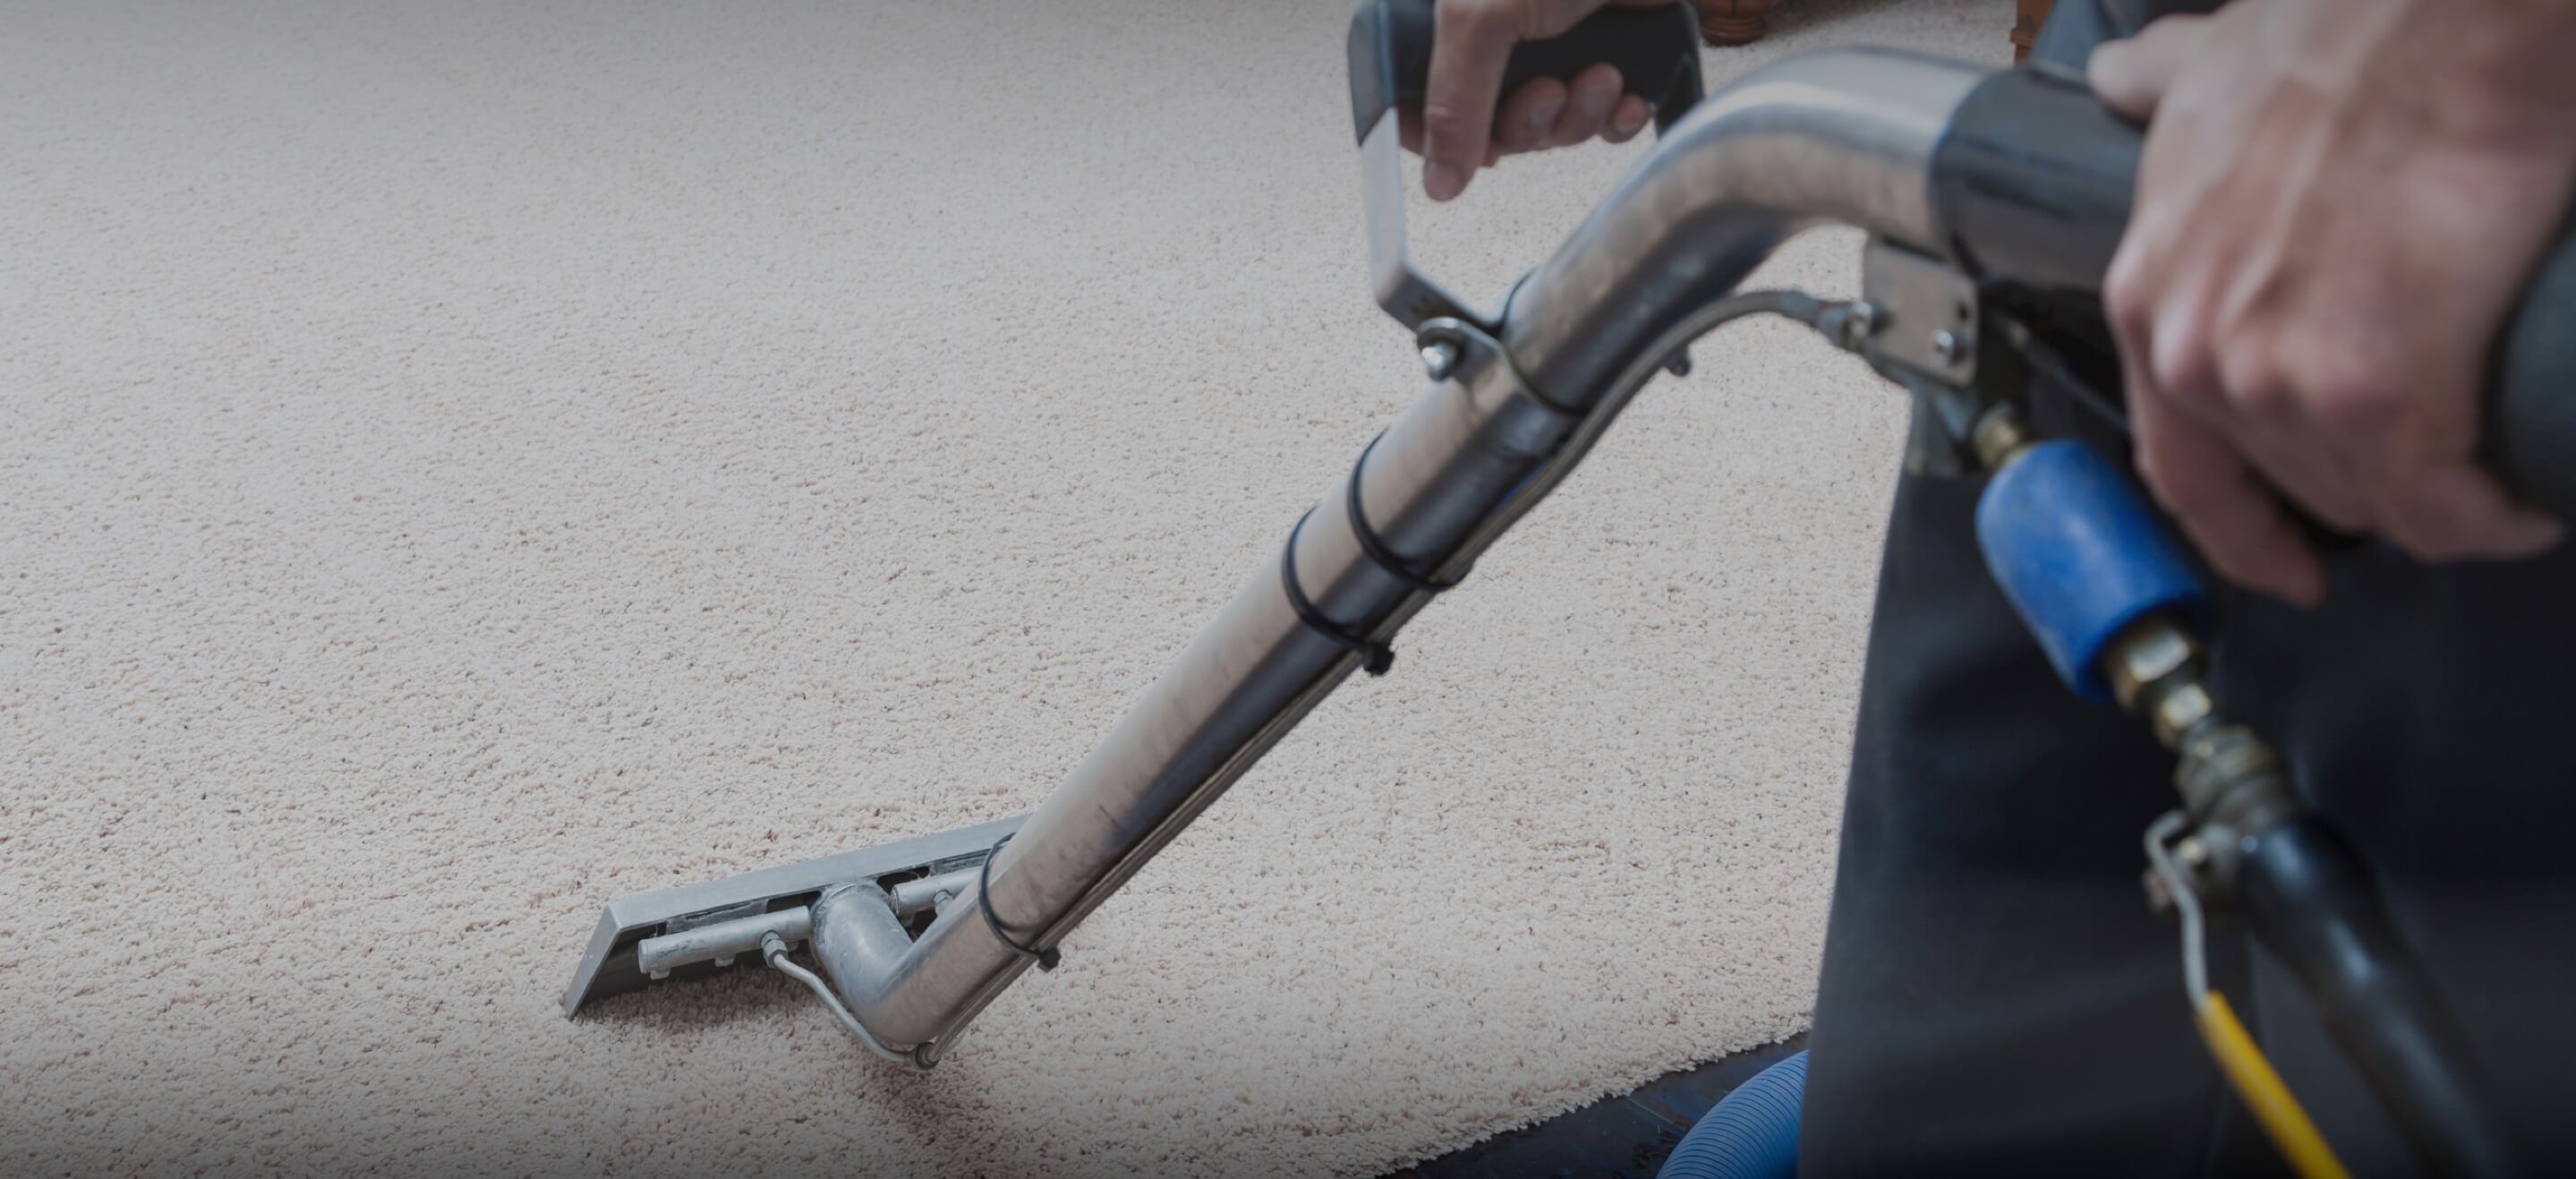 Carpet Cleaning in Laguna Woods, CA - Quality Experts - Complete Carpet  Cleaning